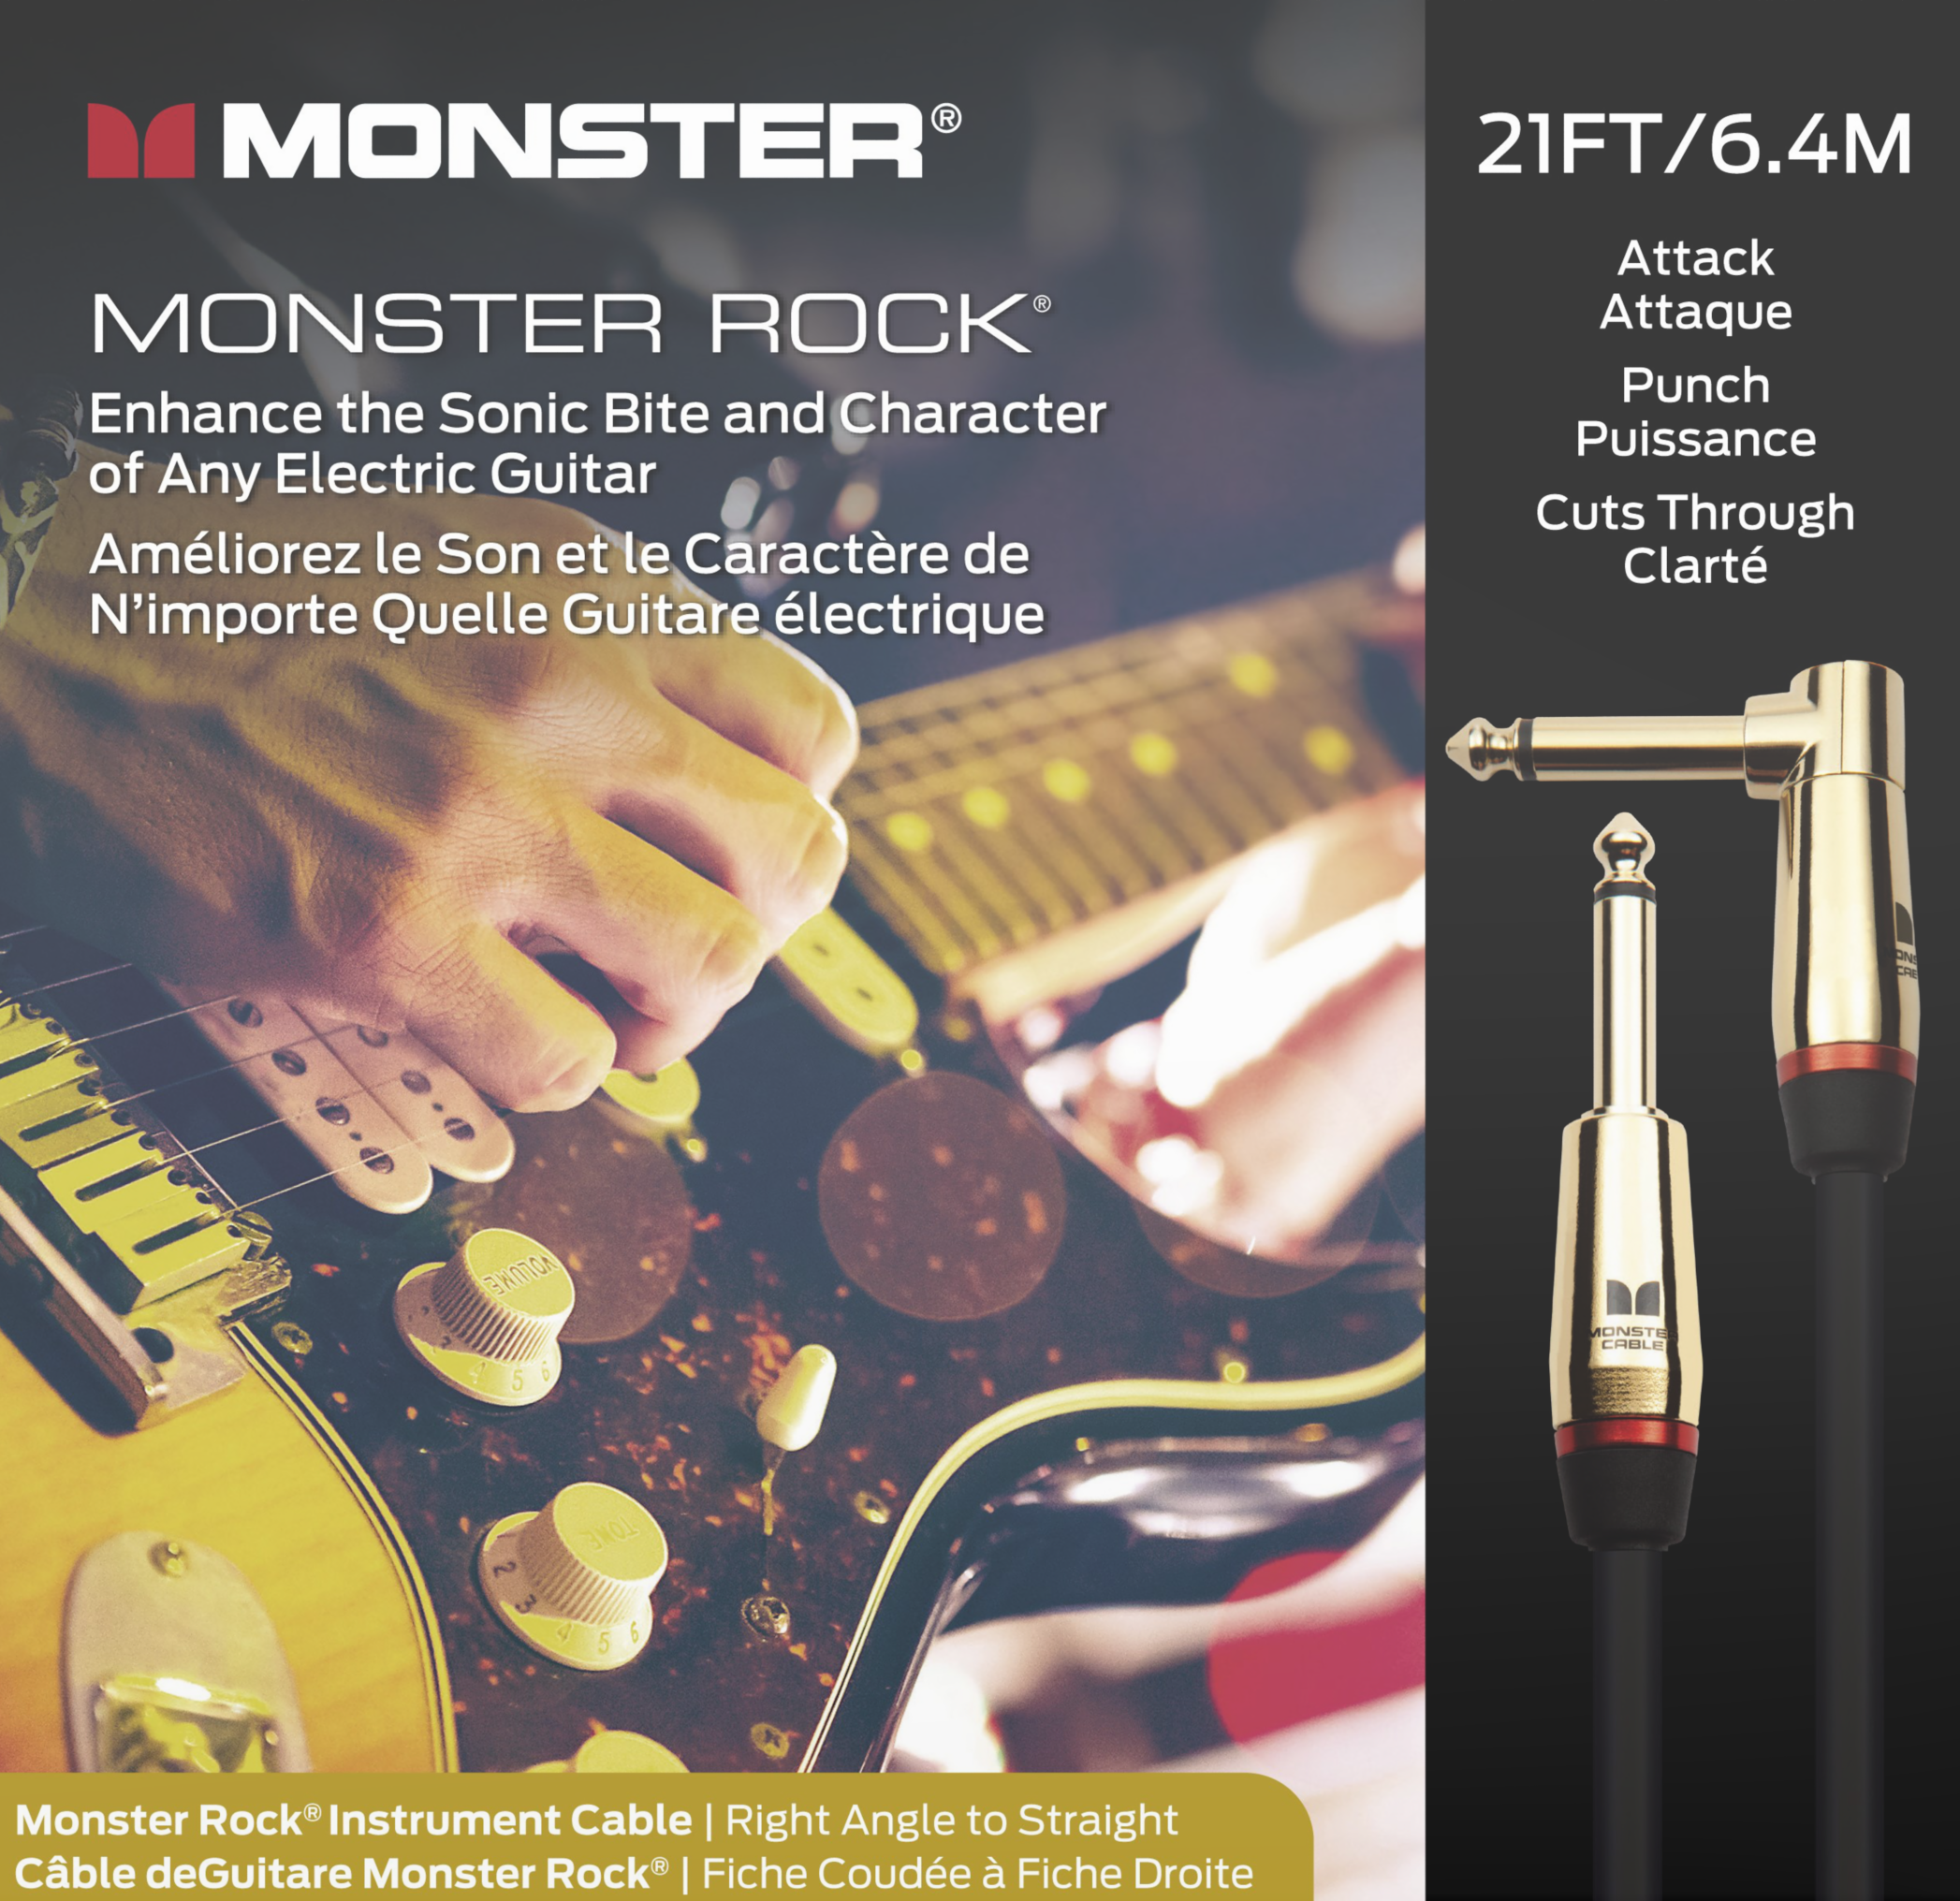 Monster® Prolink Rock Instrument Cable - HIENDGUITAR 21ft(6.4m) / Straight-Angle 21ft(6.4m) Monstercable Cable